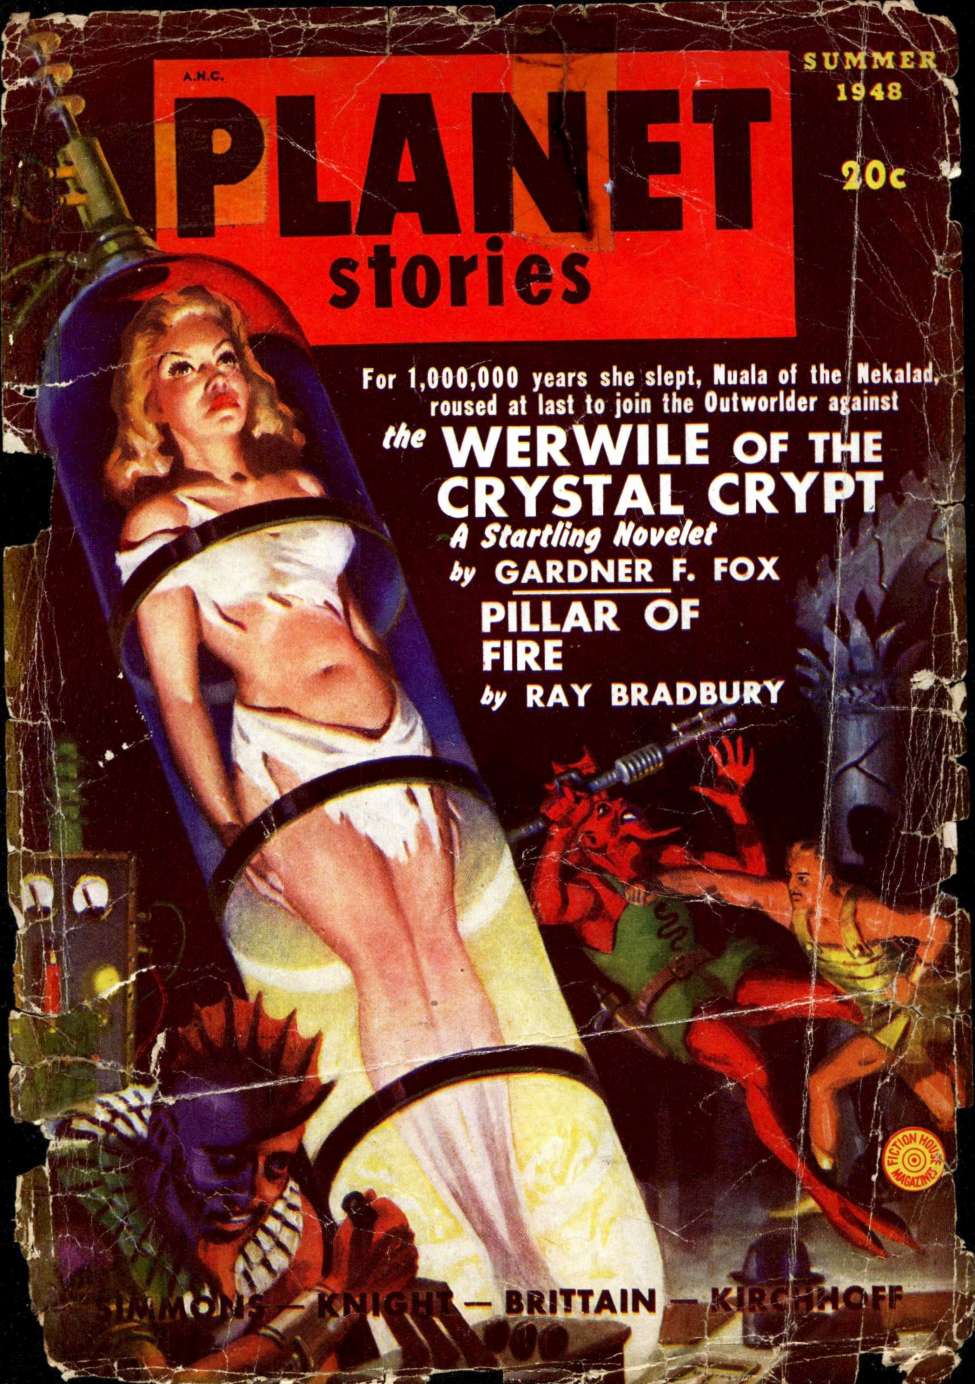 Book Cover For Planet Stories v3 11 - Werwile of the Crystal Crypt - Gardner F. Fox